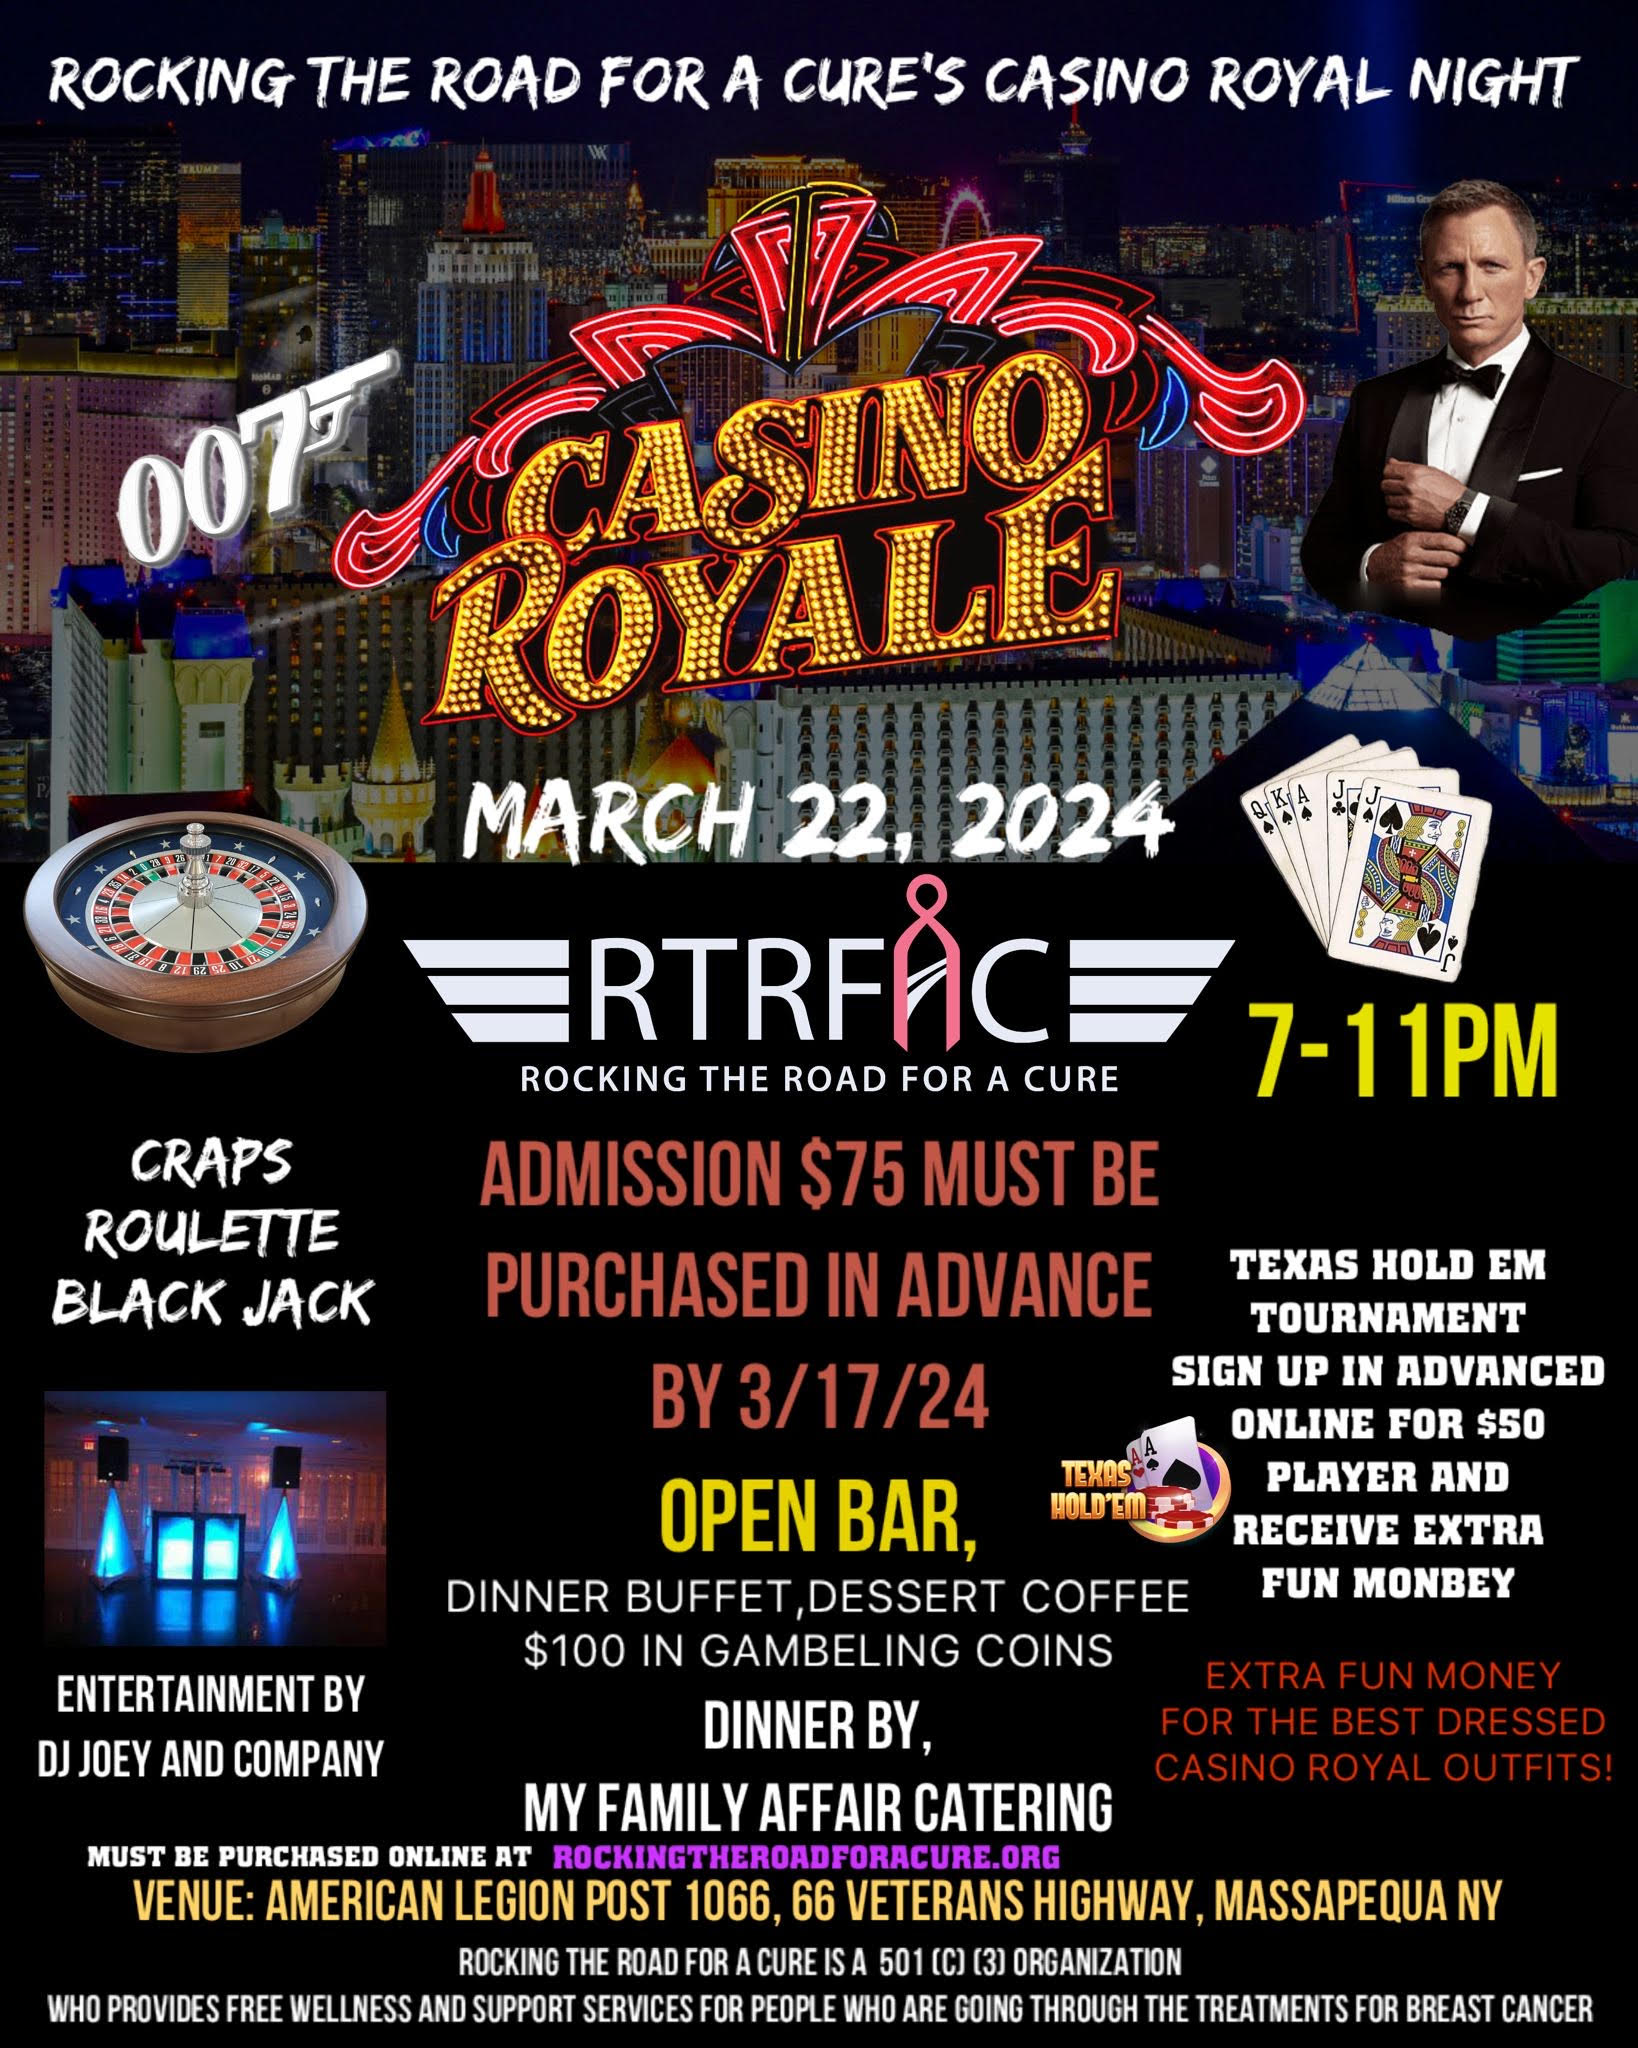 Flyer for Rocking The Road For A Cure's Casino Royale Night Fundraiser